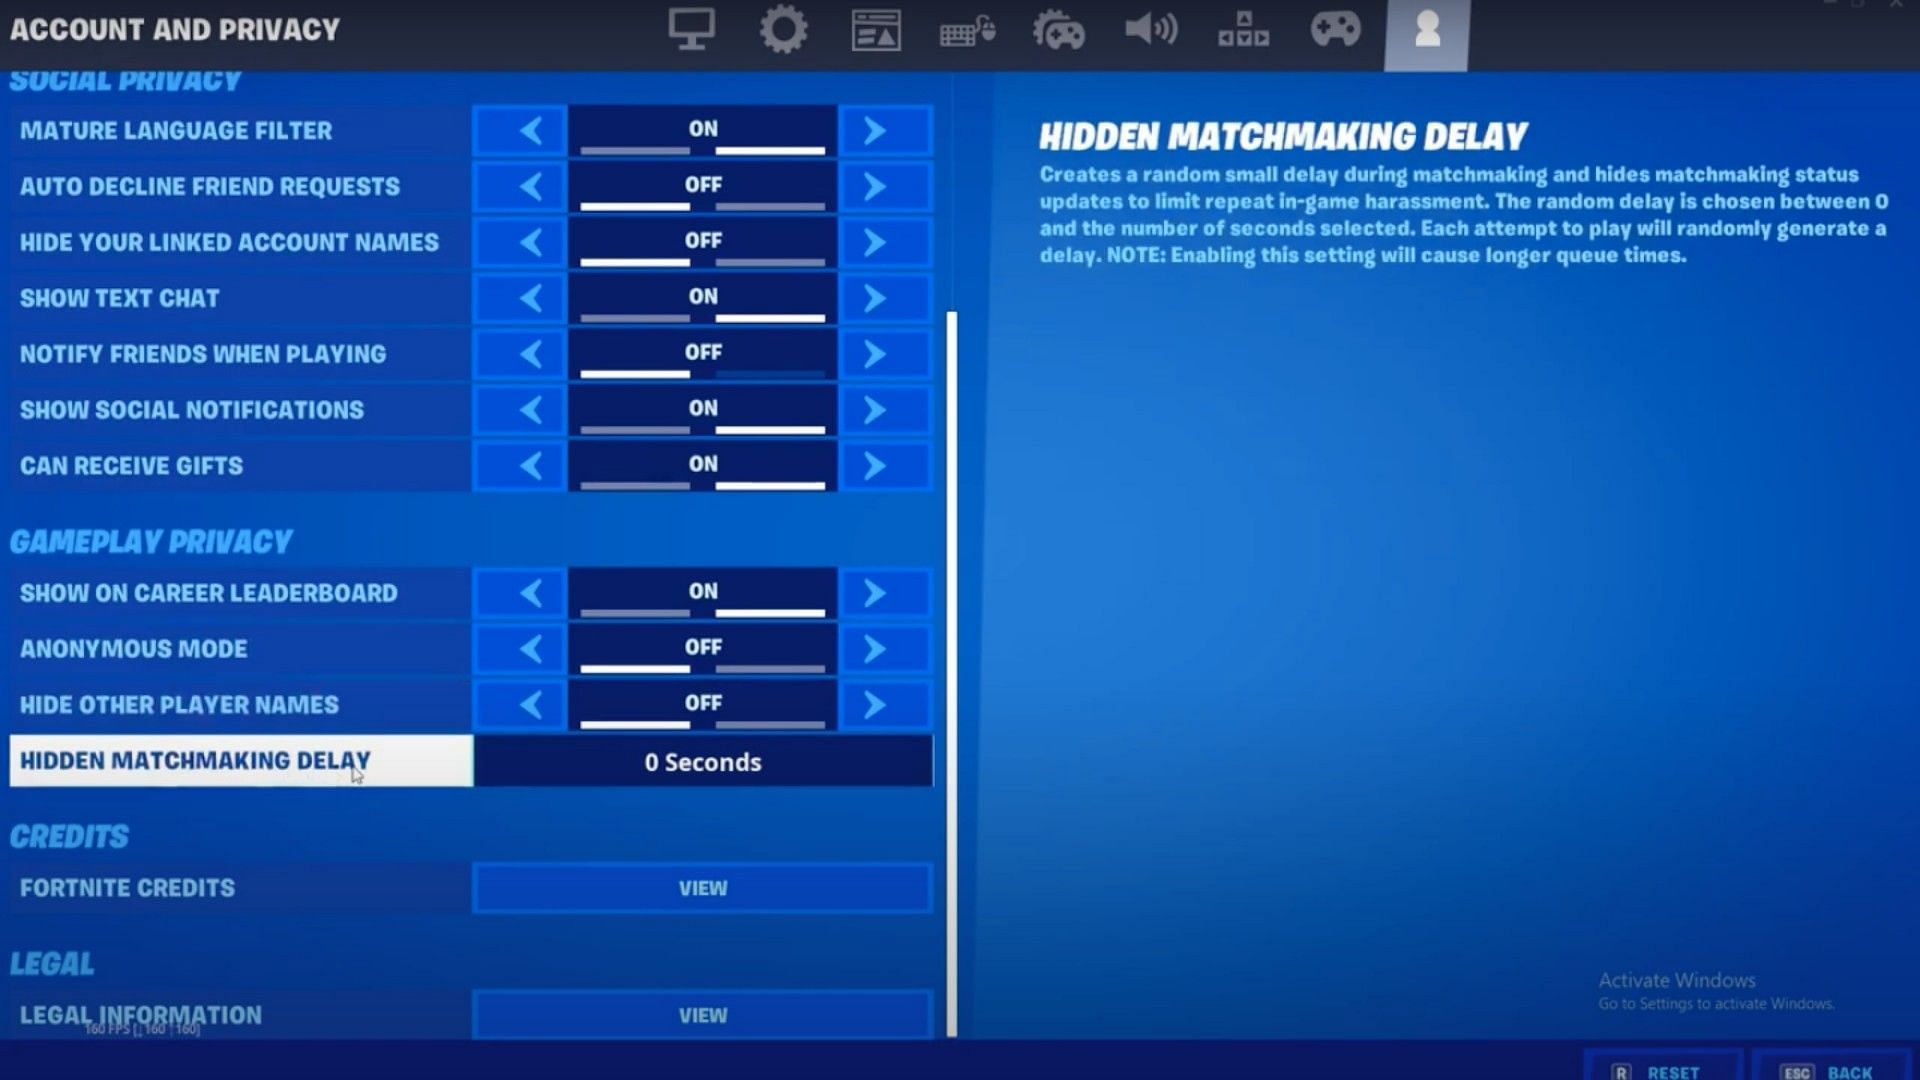 Fortnite developers are very mindful of the game